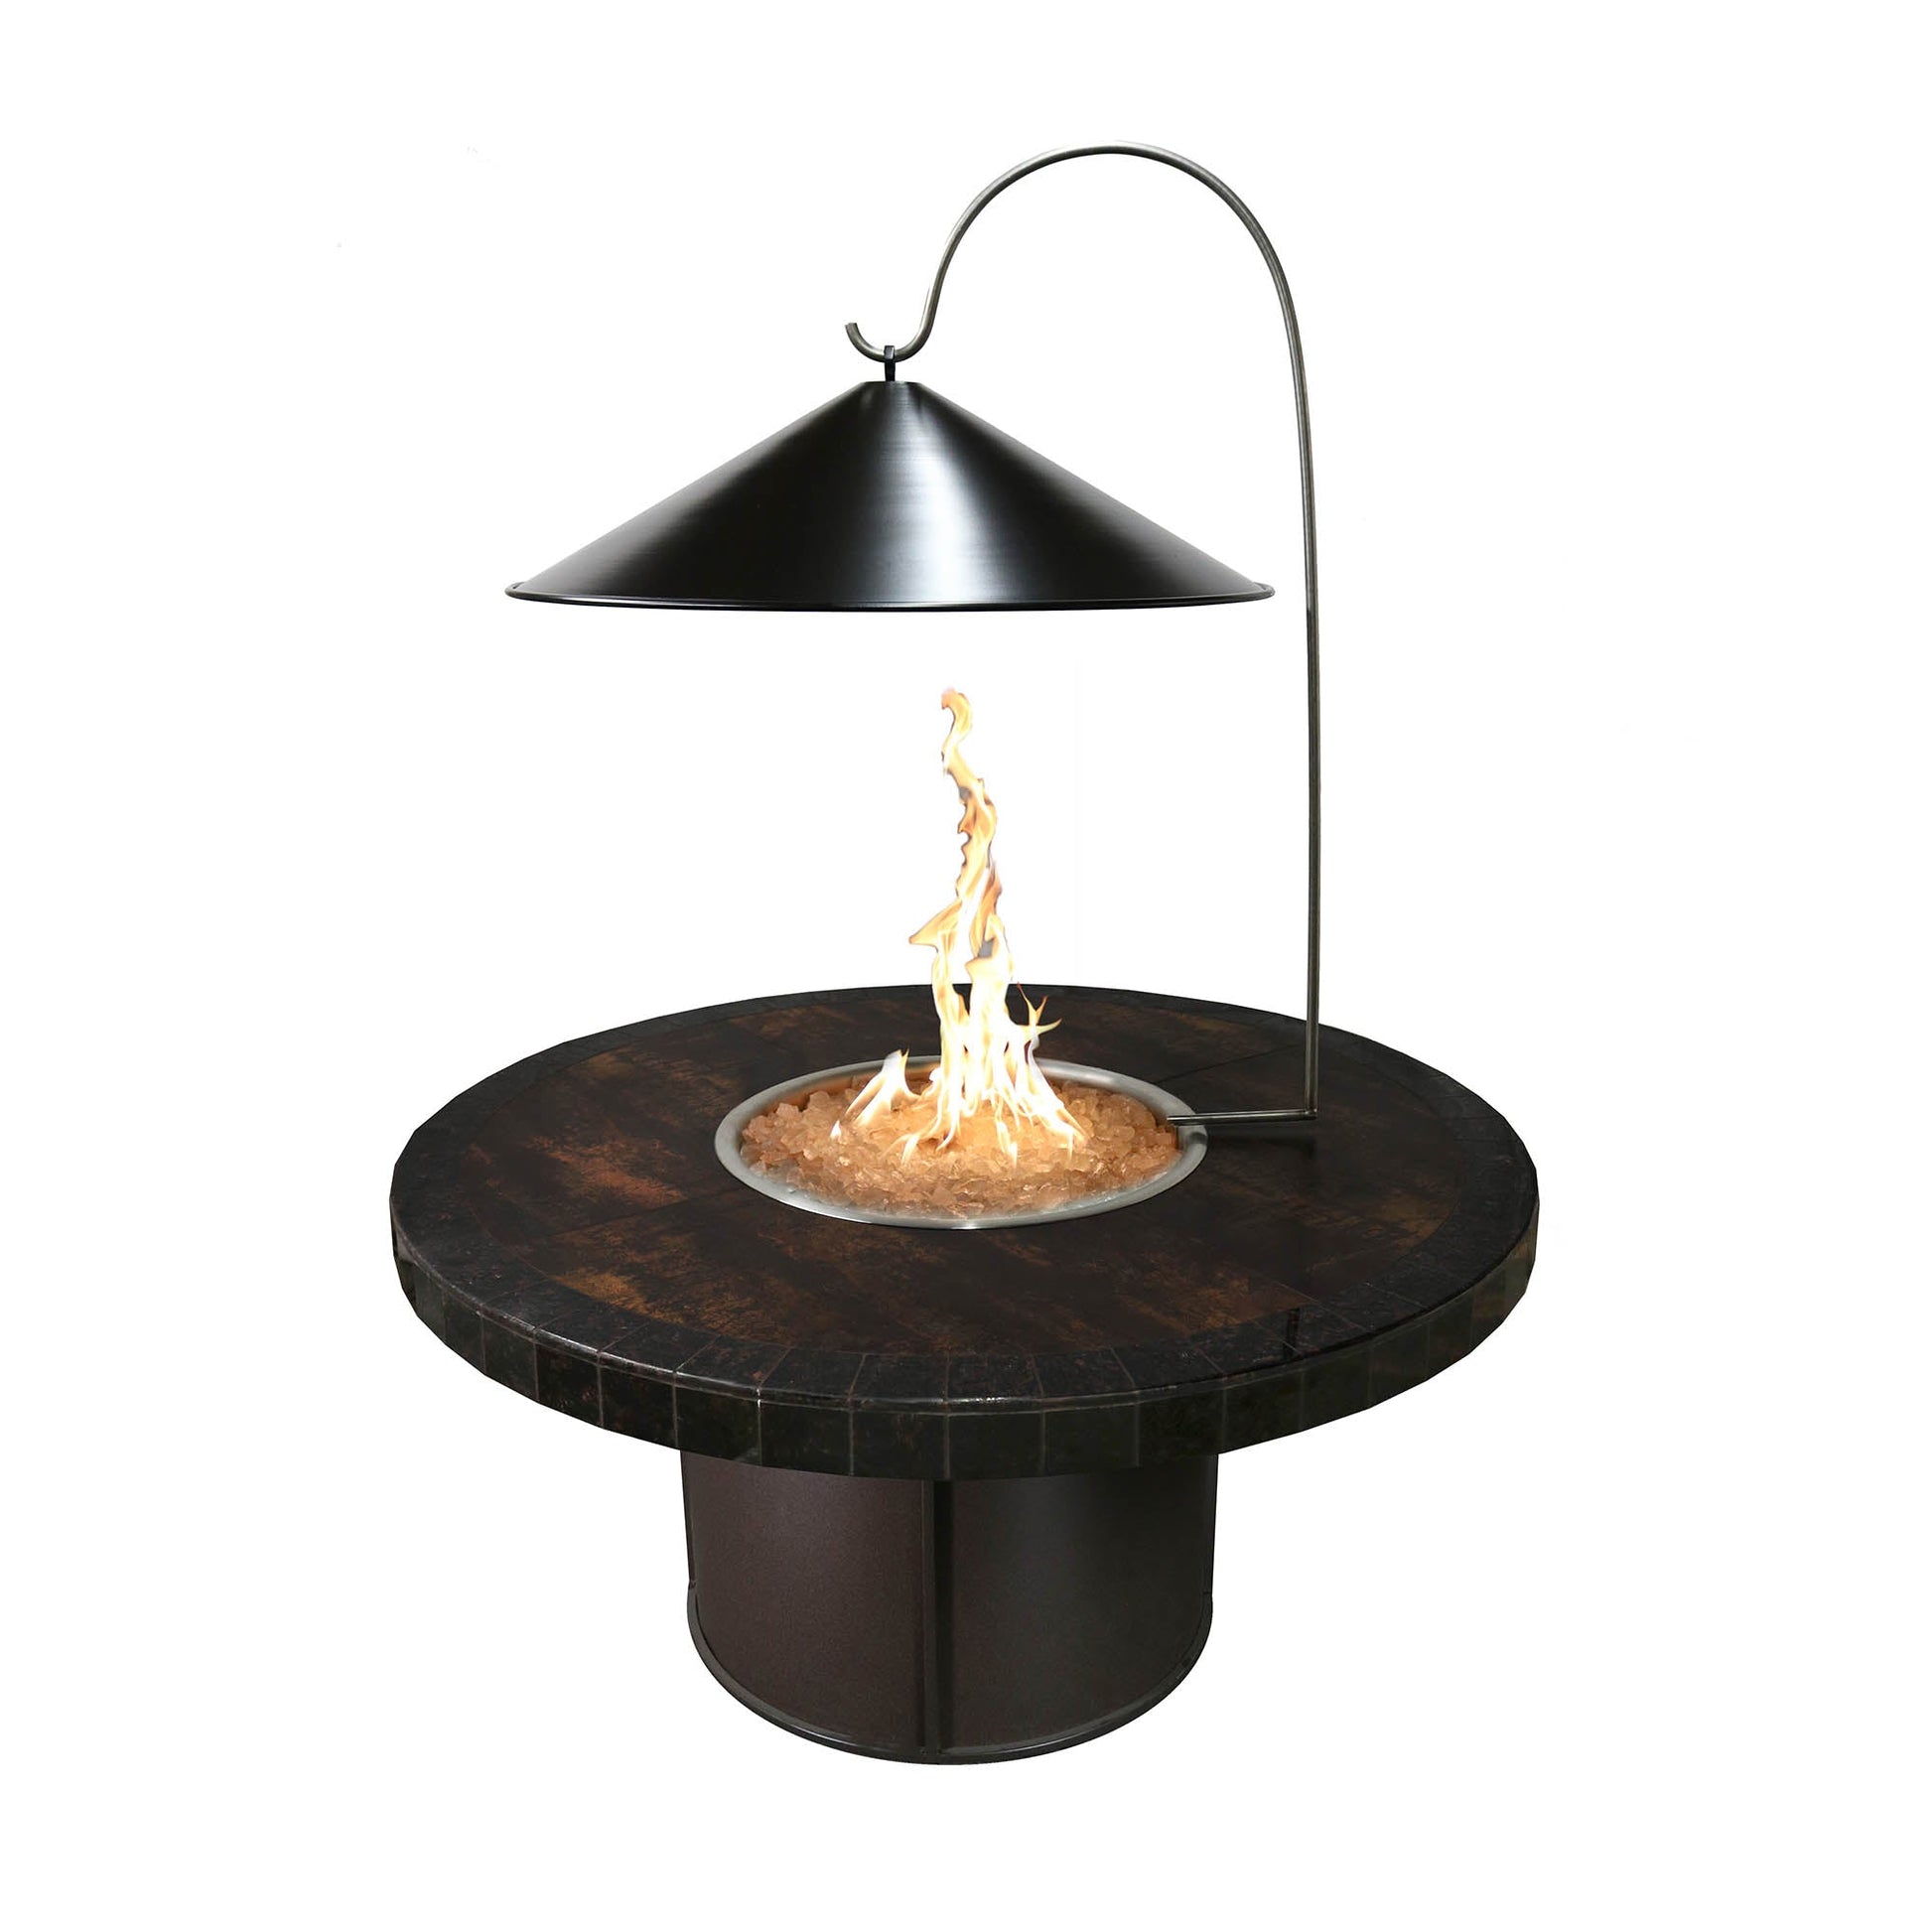 The Outdoor Plus 23" Black Aluminum Fire Pit Cover & Heat Reflector with Stand